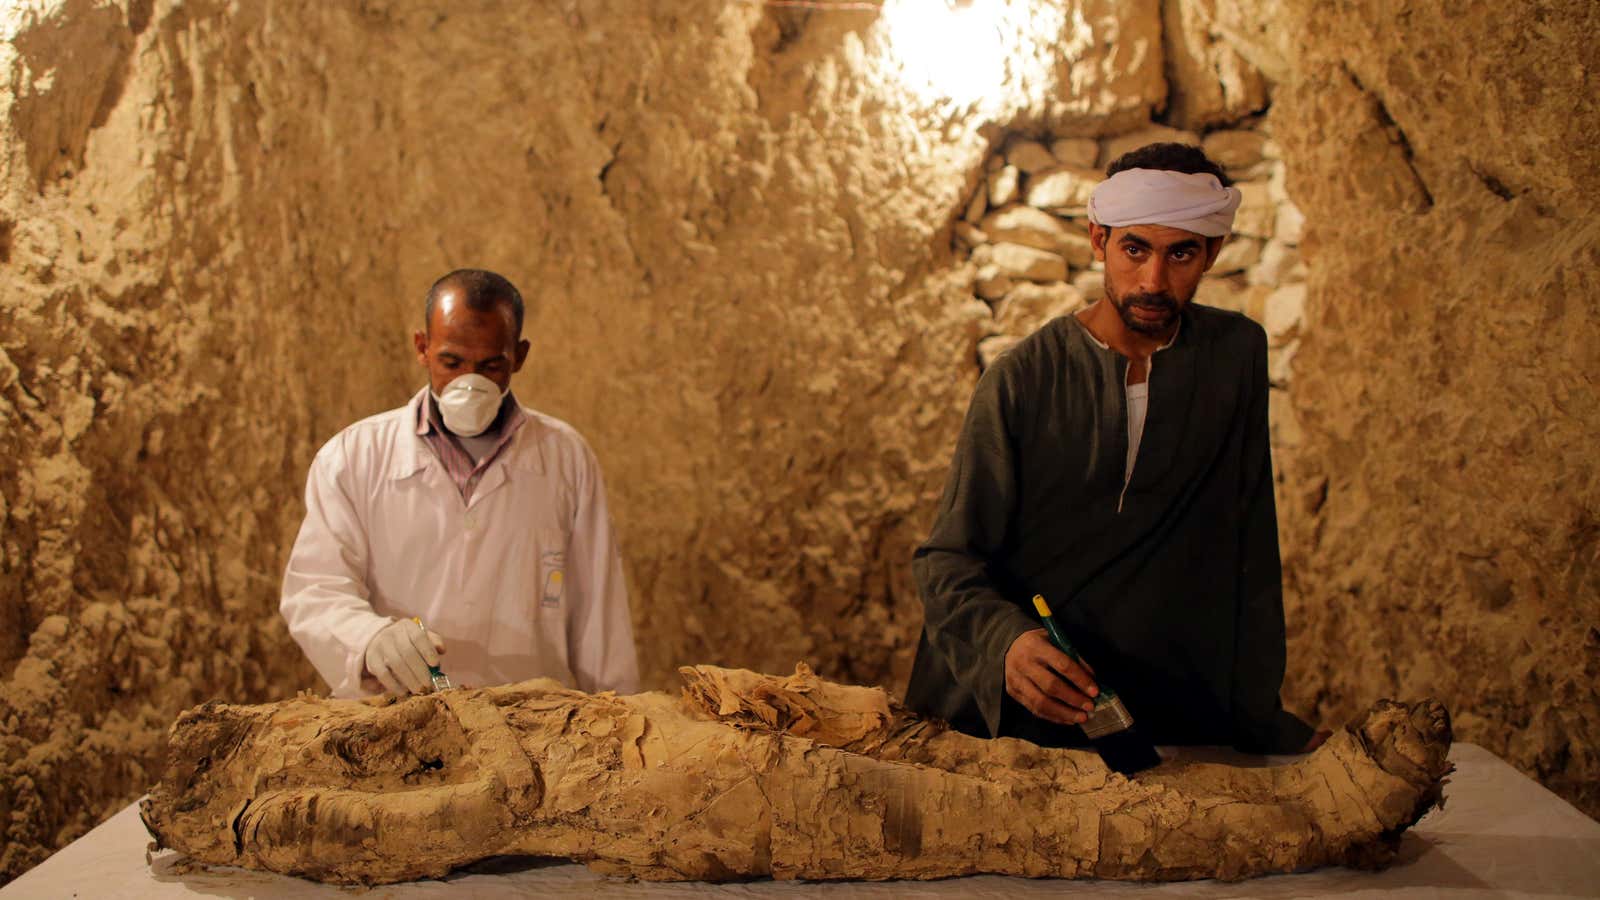 Egypt is hopeful that the newly opened tombs and the items in them, like this mummy, will bring the tourists flocking back.